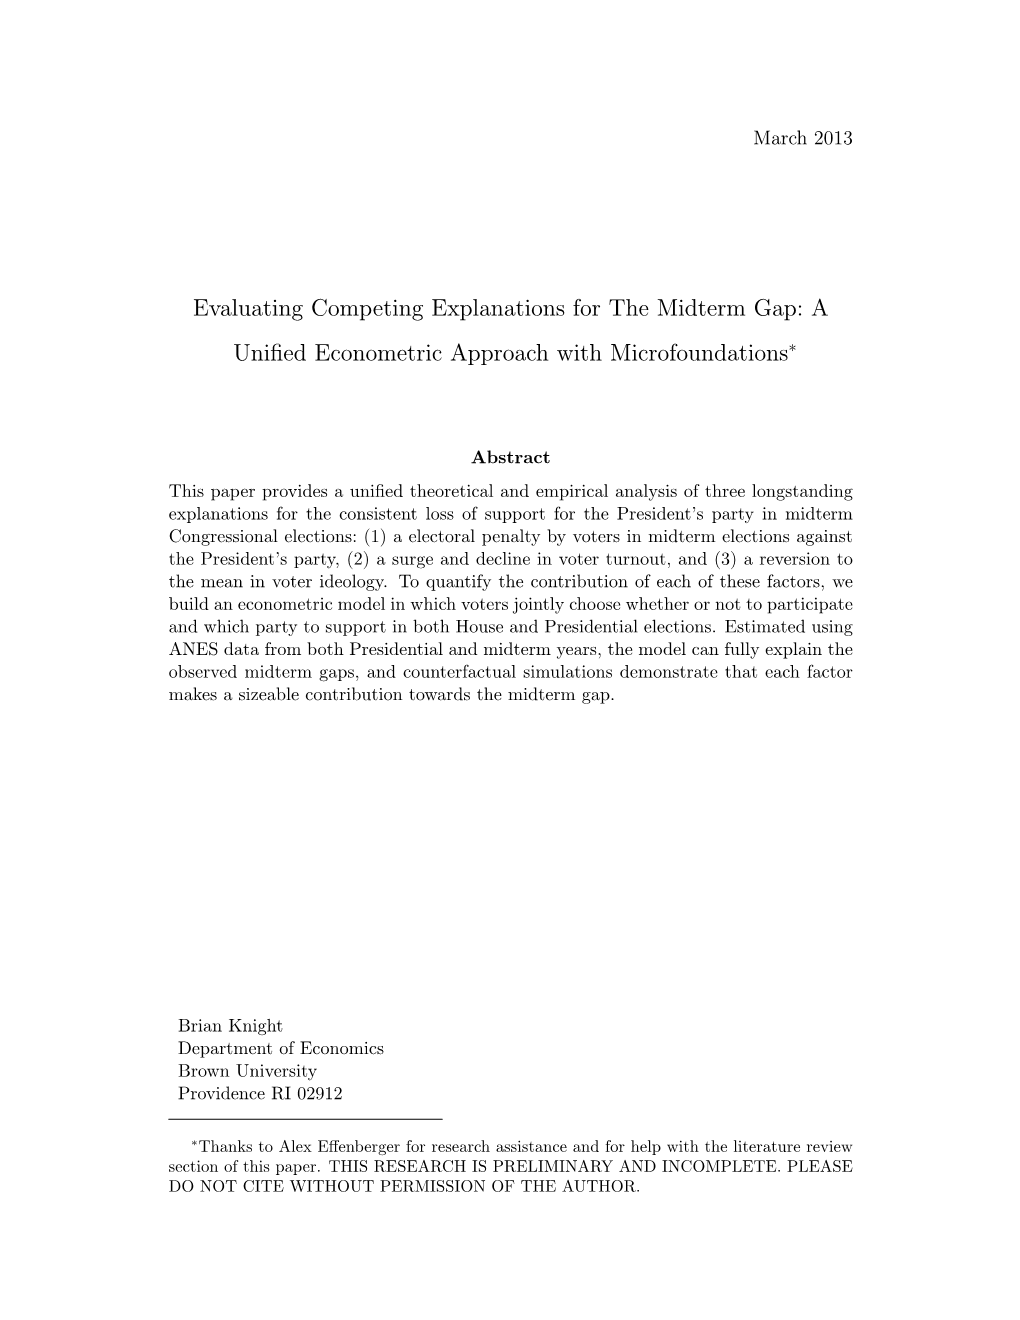 Evaluating Competing Explanations for the Midterm Gap: A